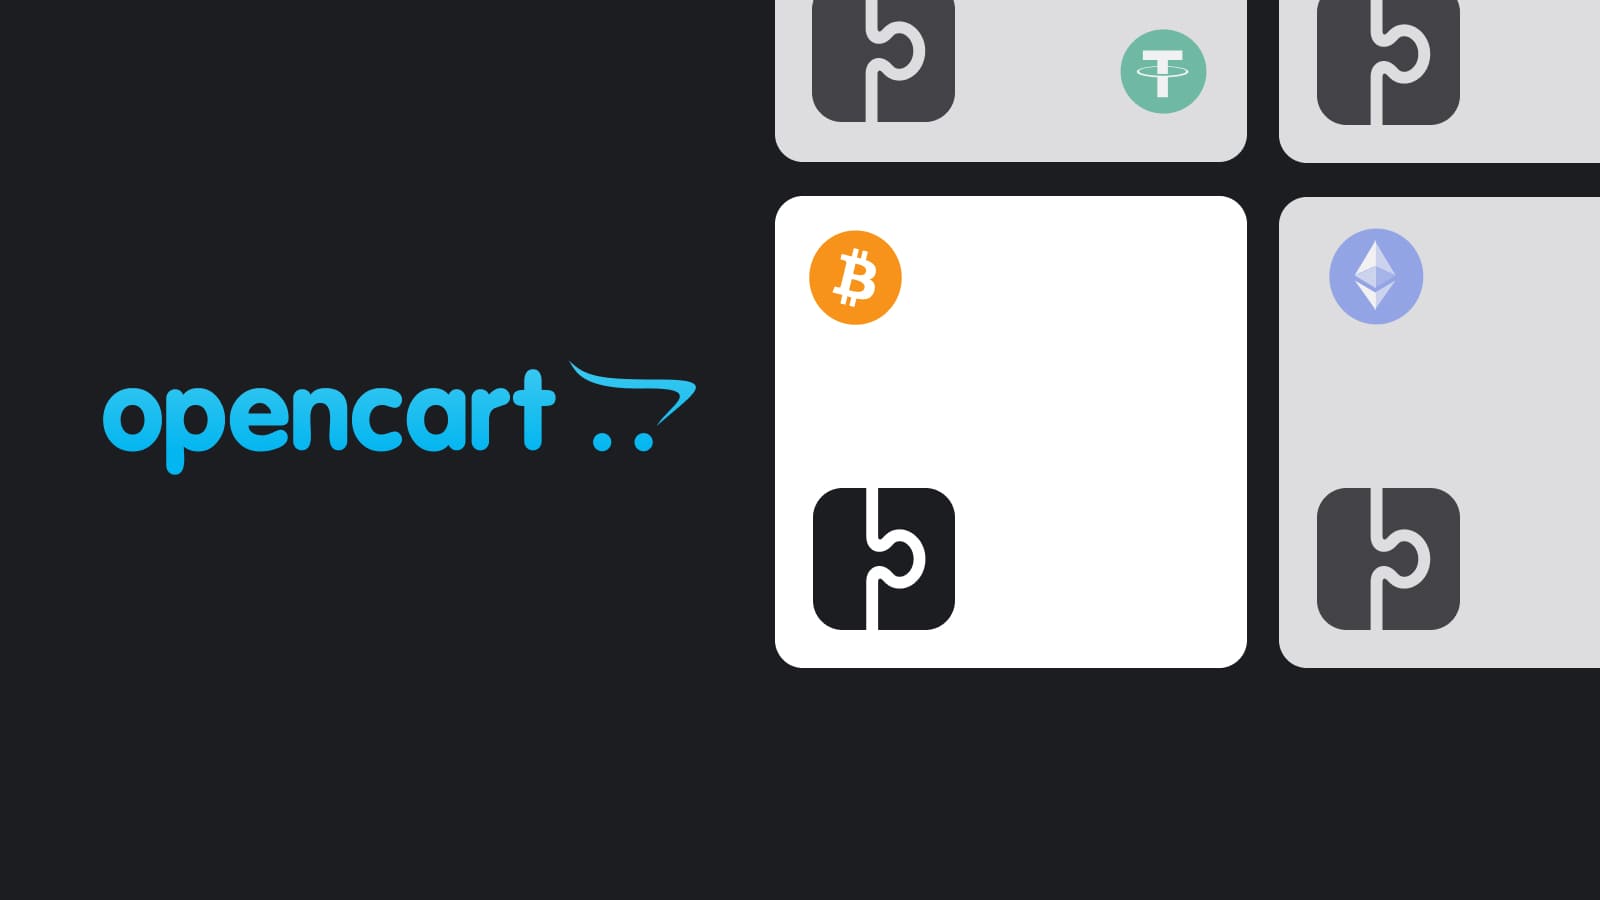 On OpenCart, users can accept fast and cost-effective cryptocurrency payments.